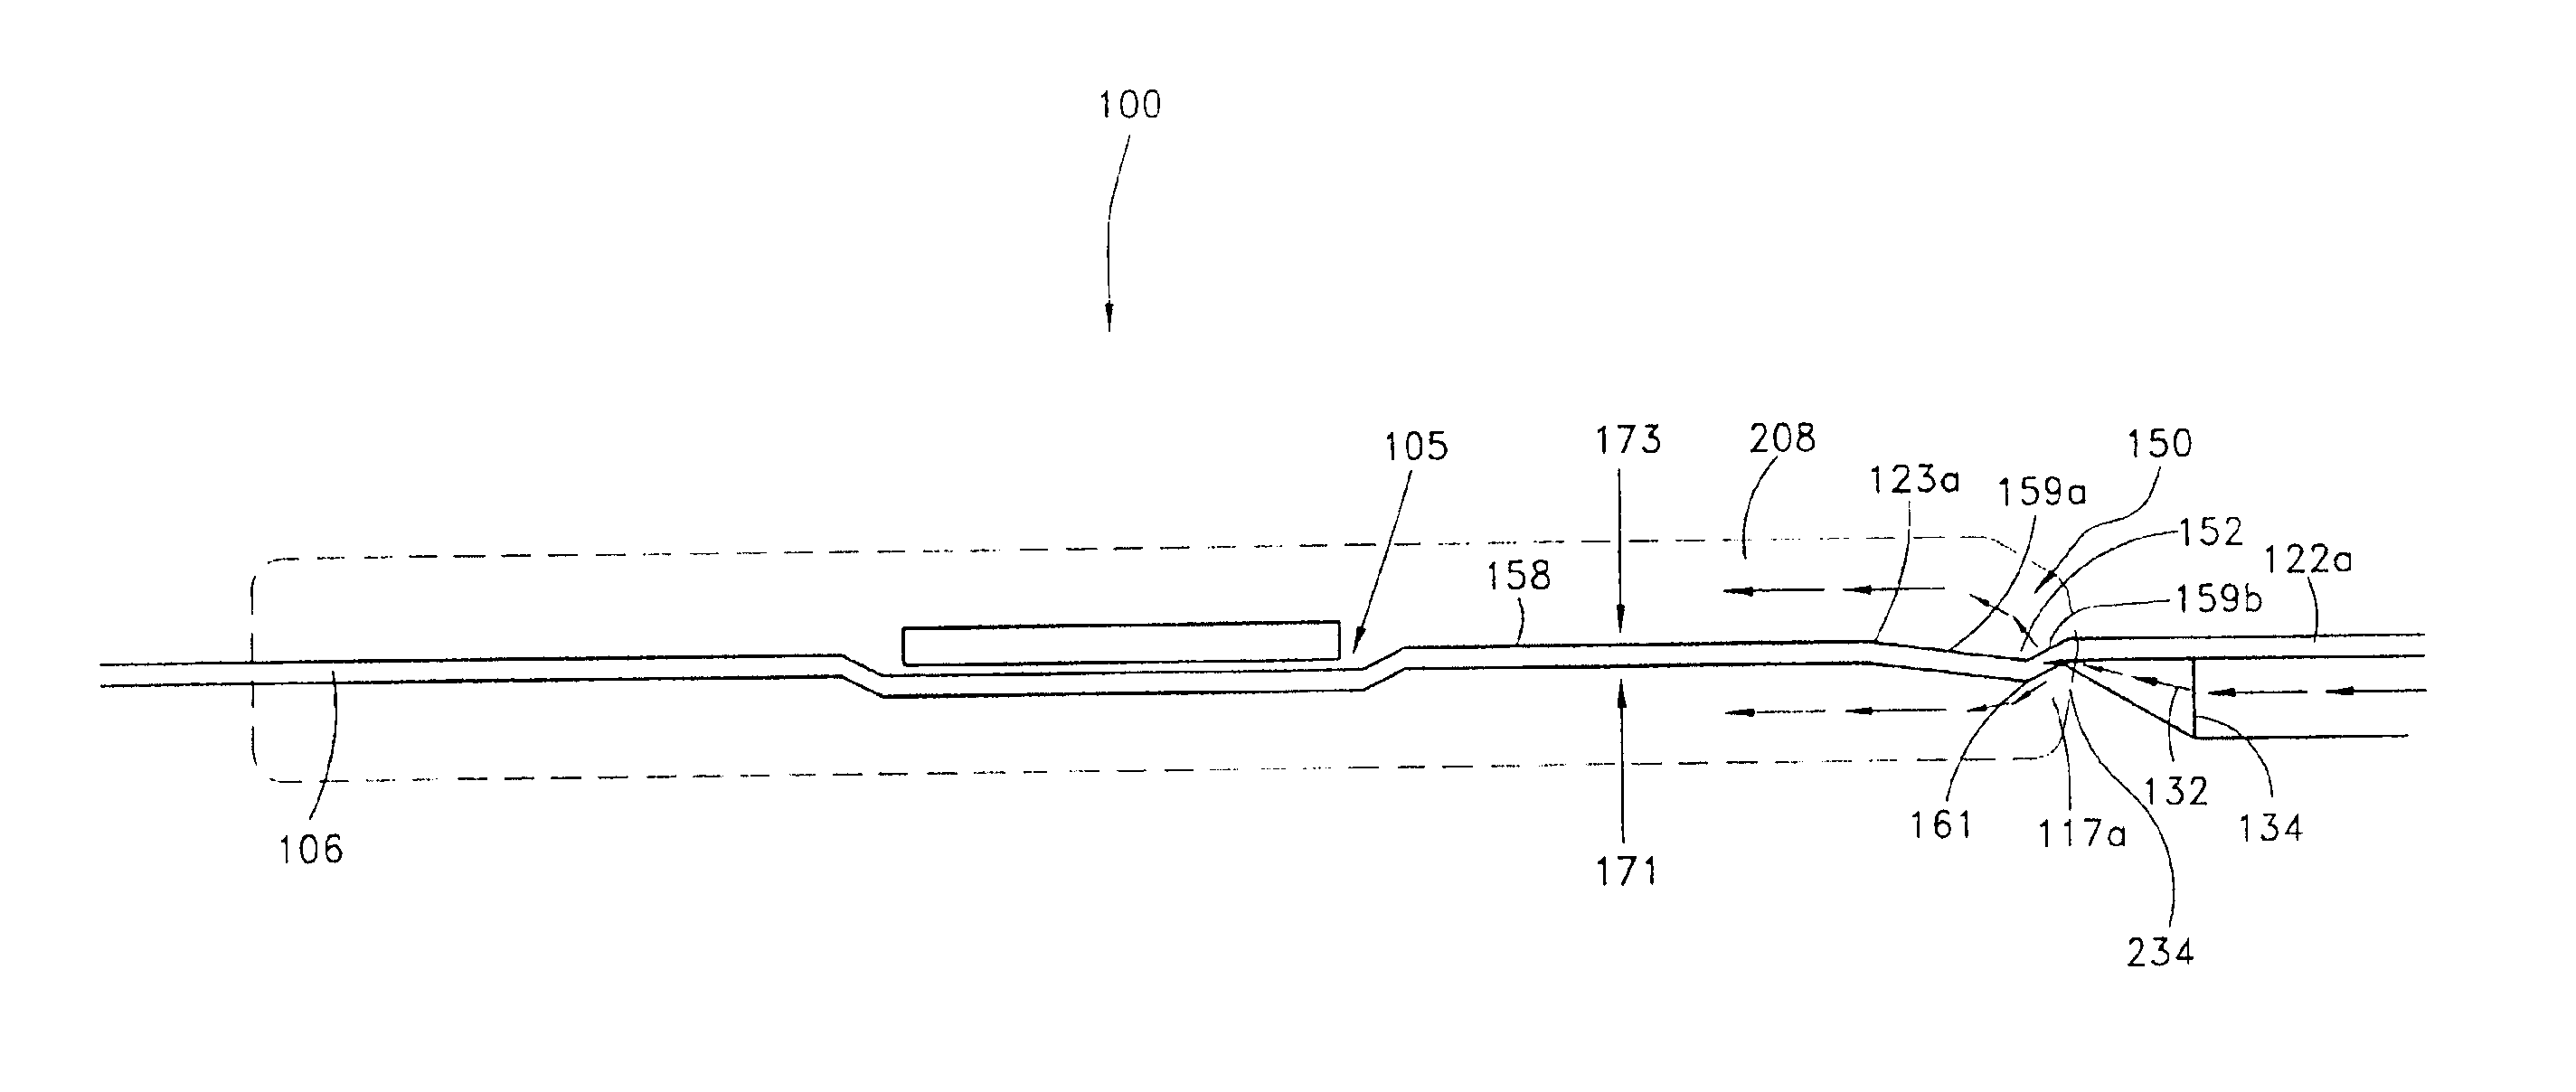 Leadframe alteration to direct compound flow into package